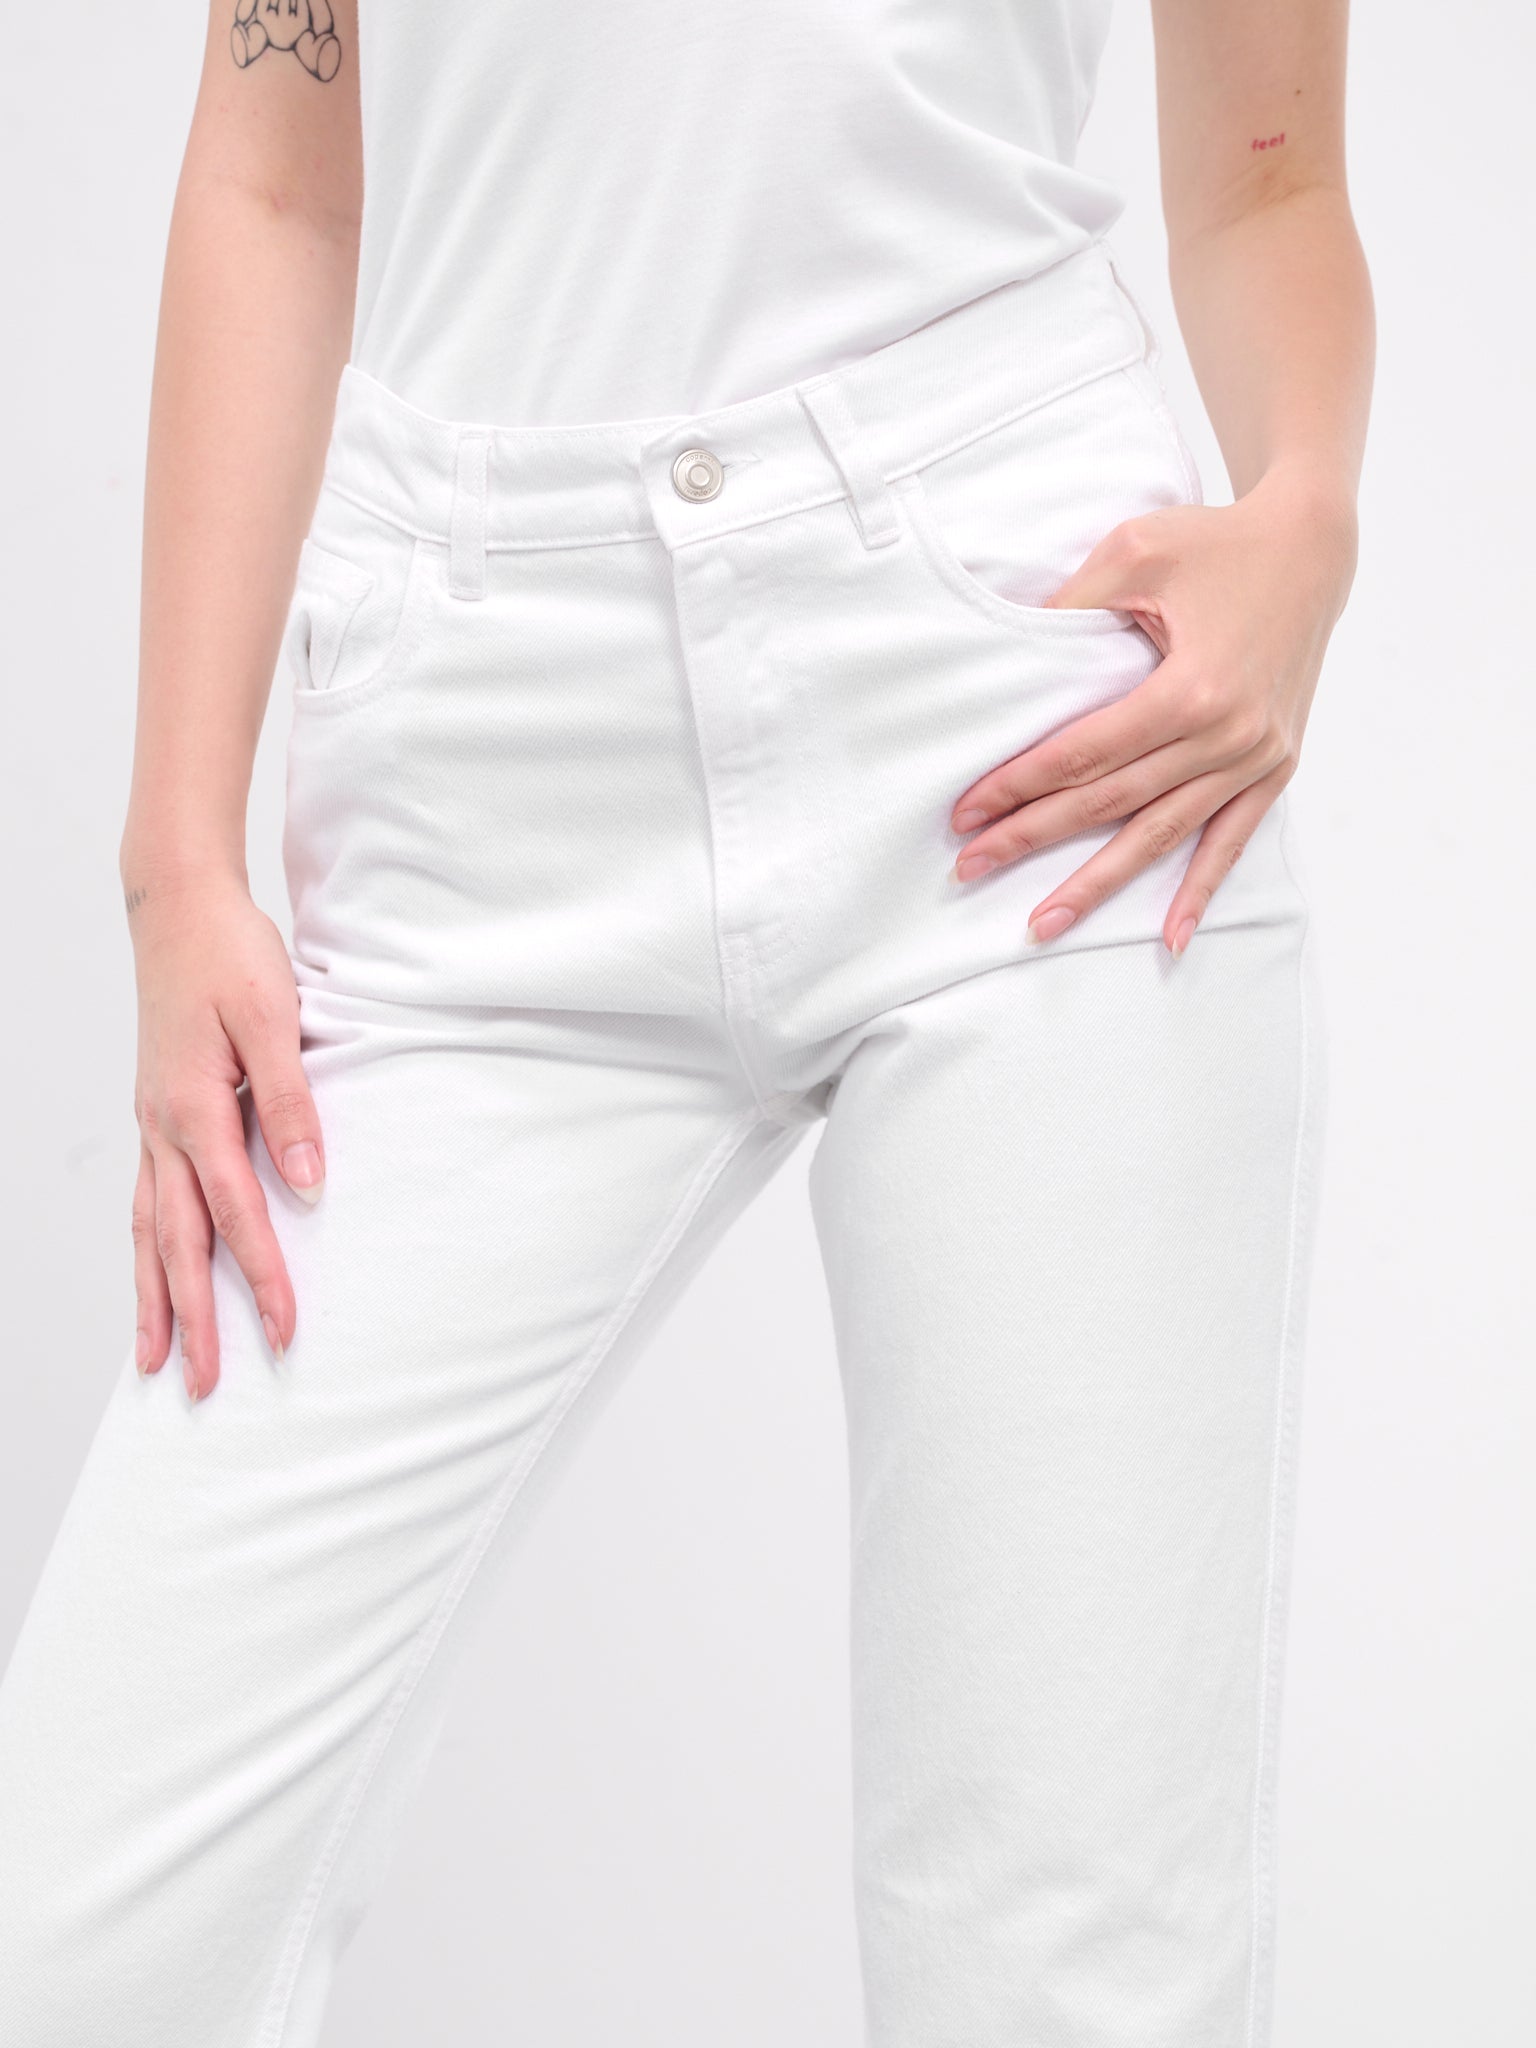 Belted Pocket Jeans (COPP78251-WHITE)